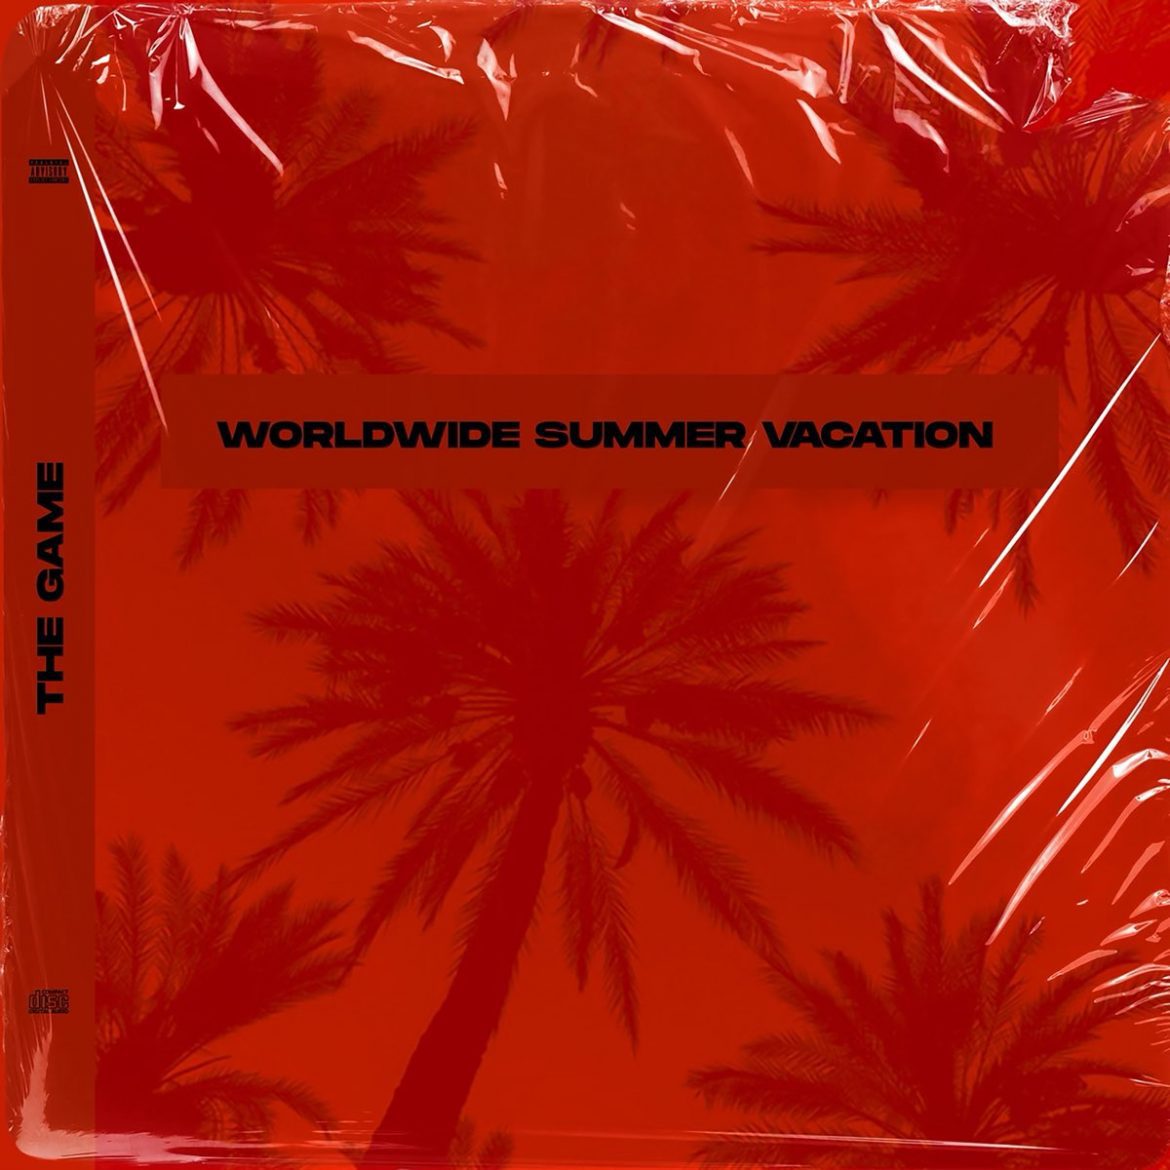 The Game – “Worldwide Summer Vacation”